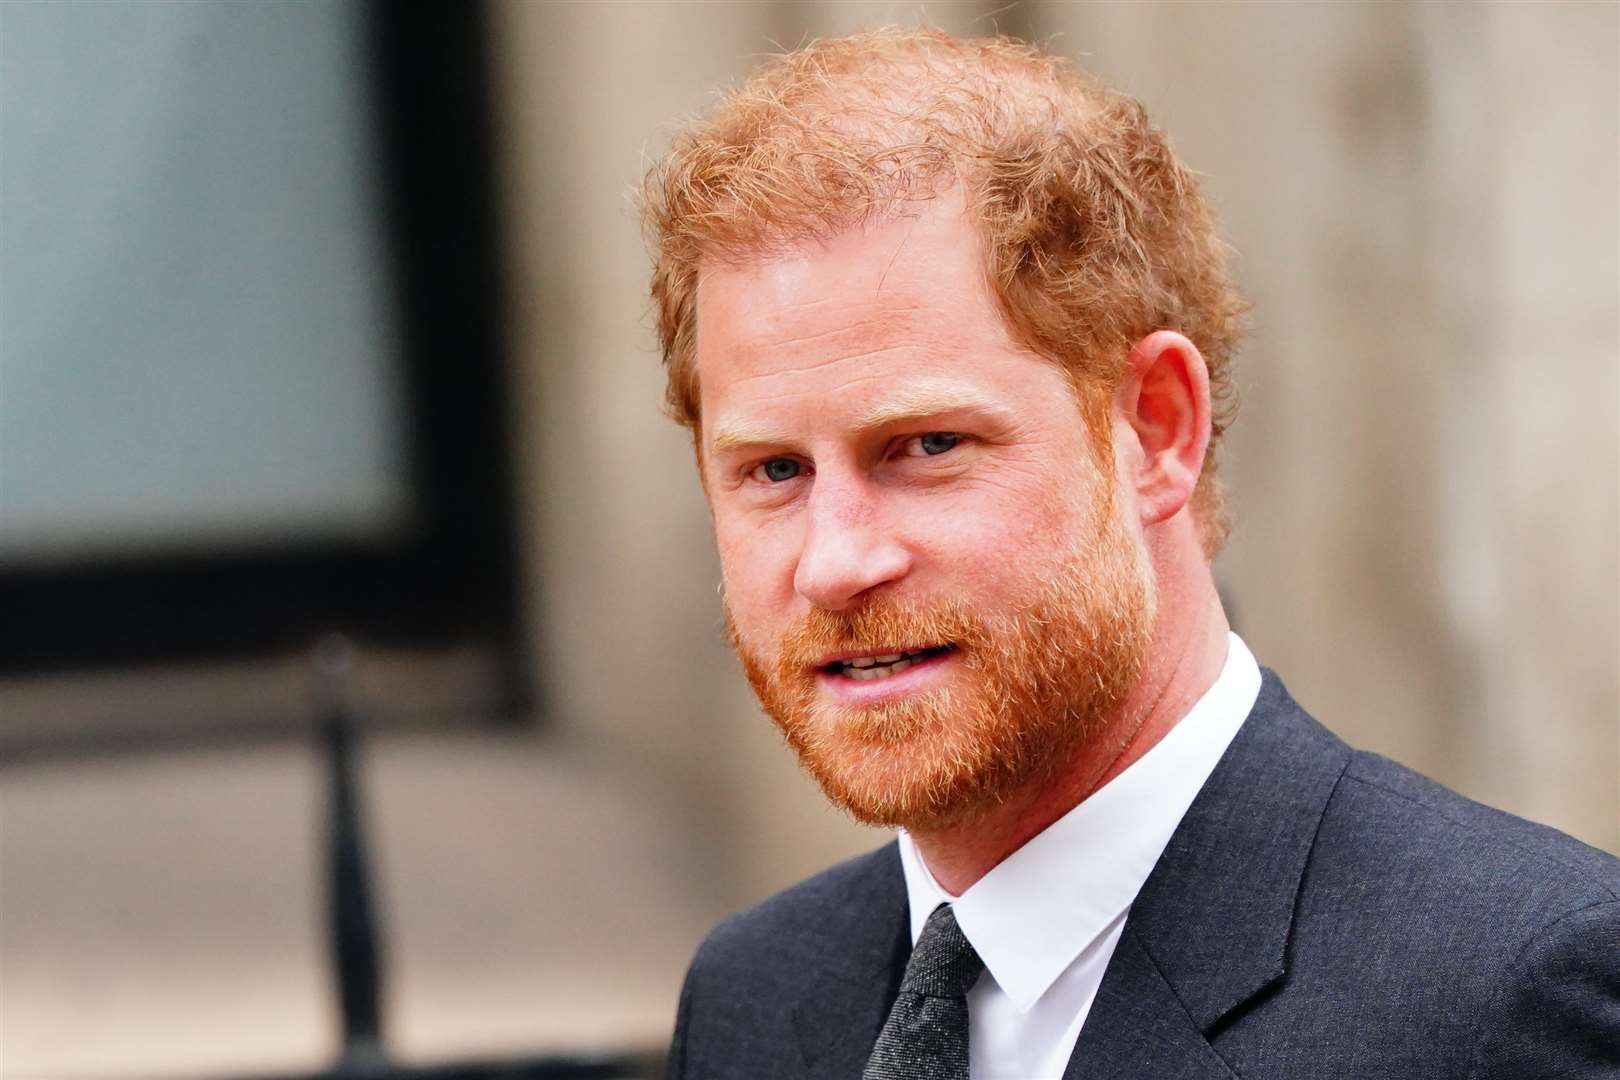 The Duke of Sussex is expected in court on Tuesday (Victoria Jones/PA)